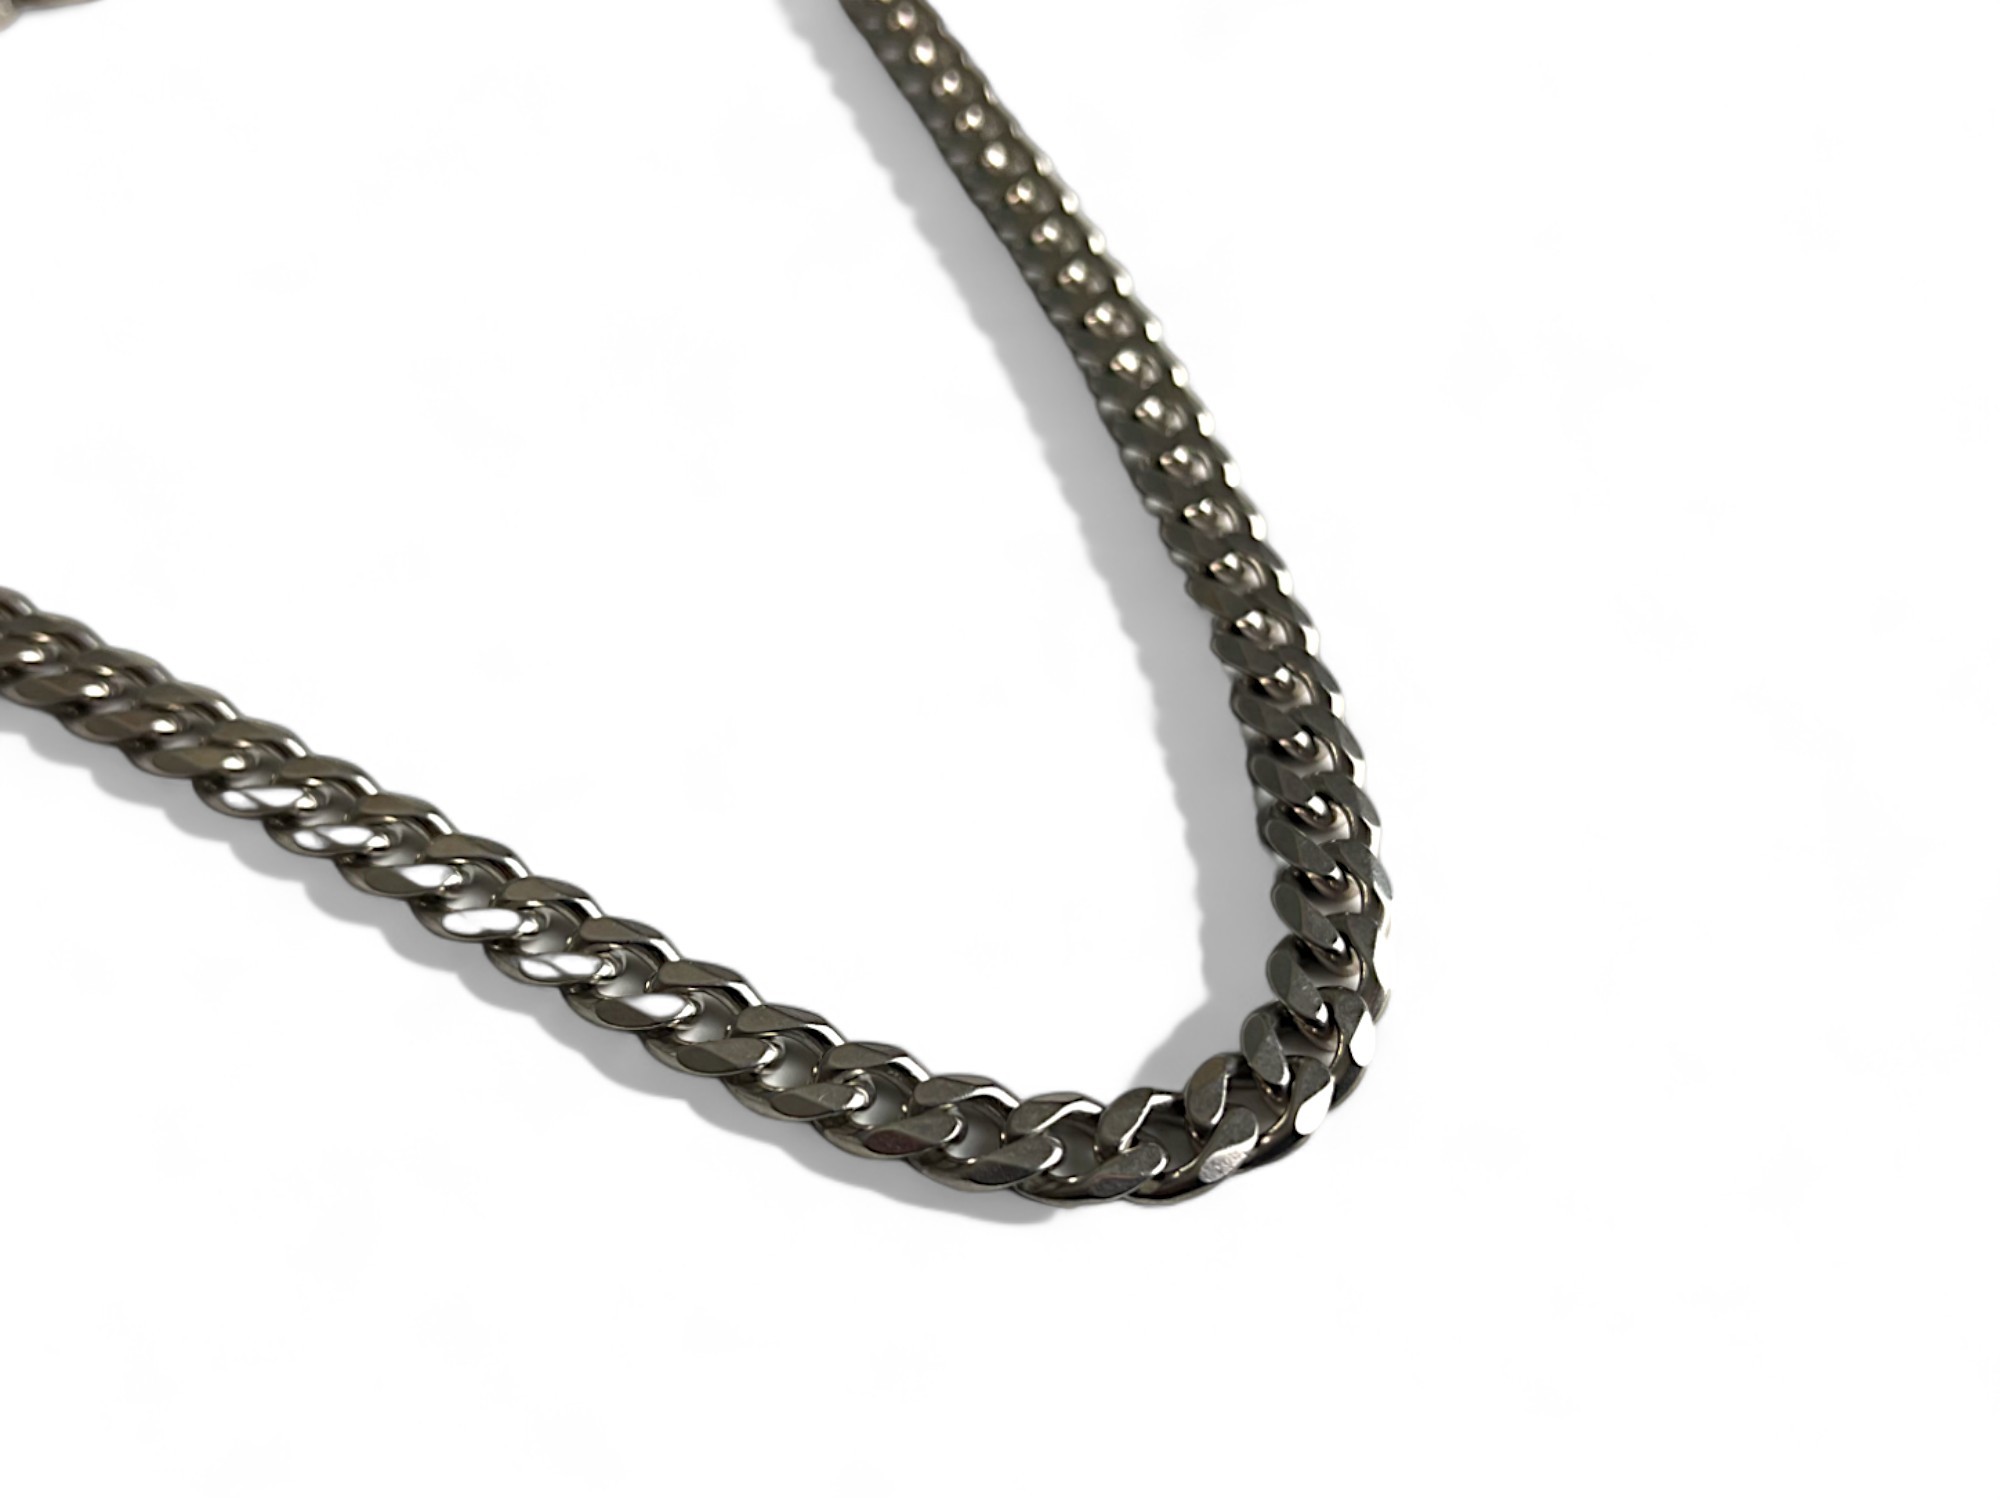 Men's sterling silver curb link chain. Weight - 58.2gms  - Image 2 of 2